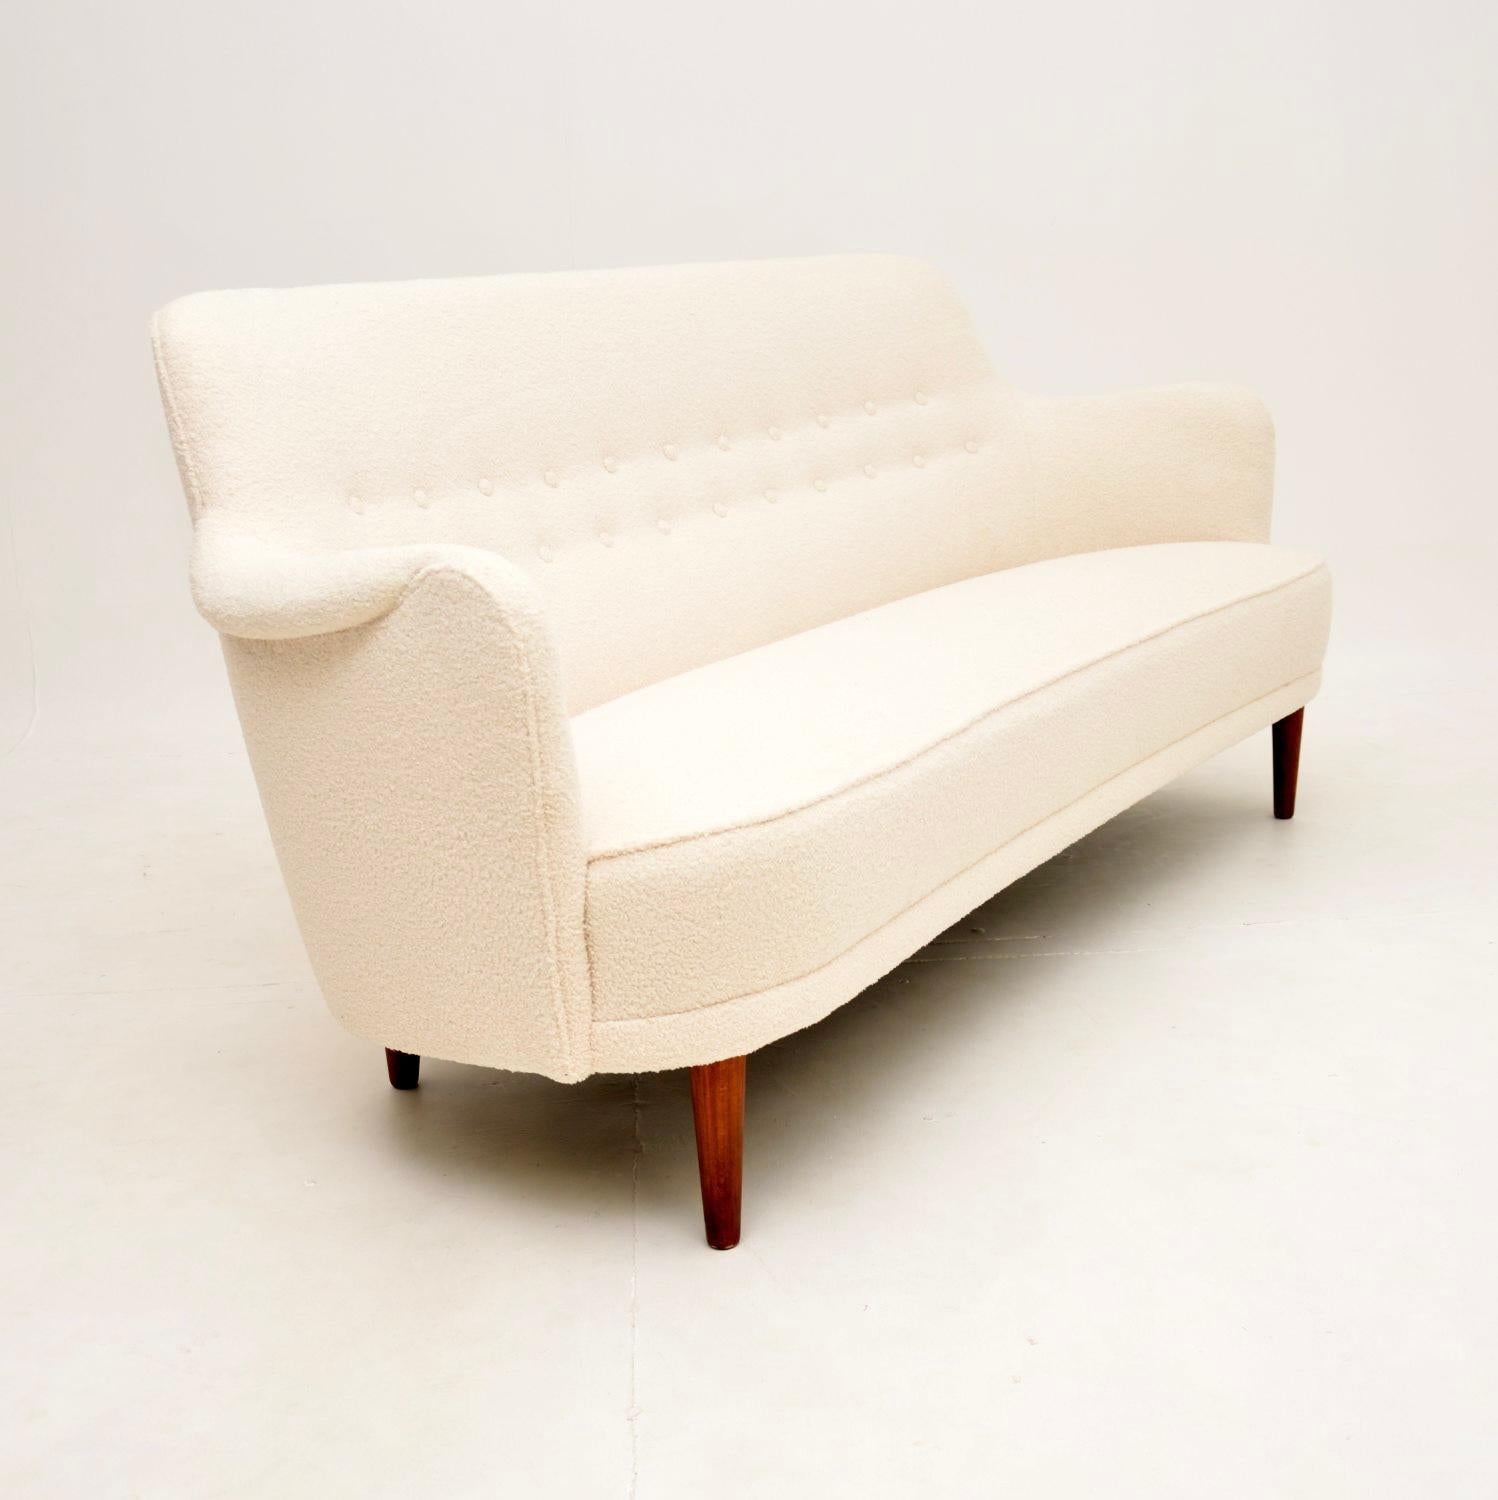 A stylish and extremely comfortable vintage Swedish Samsas sofa by Carl Malmsten. It was recently imported from Sweden, it dates from around the 1960’s.

This is of very high quality, the well built frame looks amazing from all angles and is so